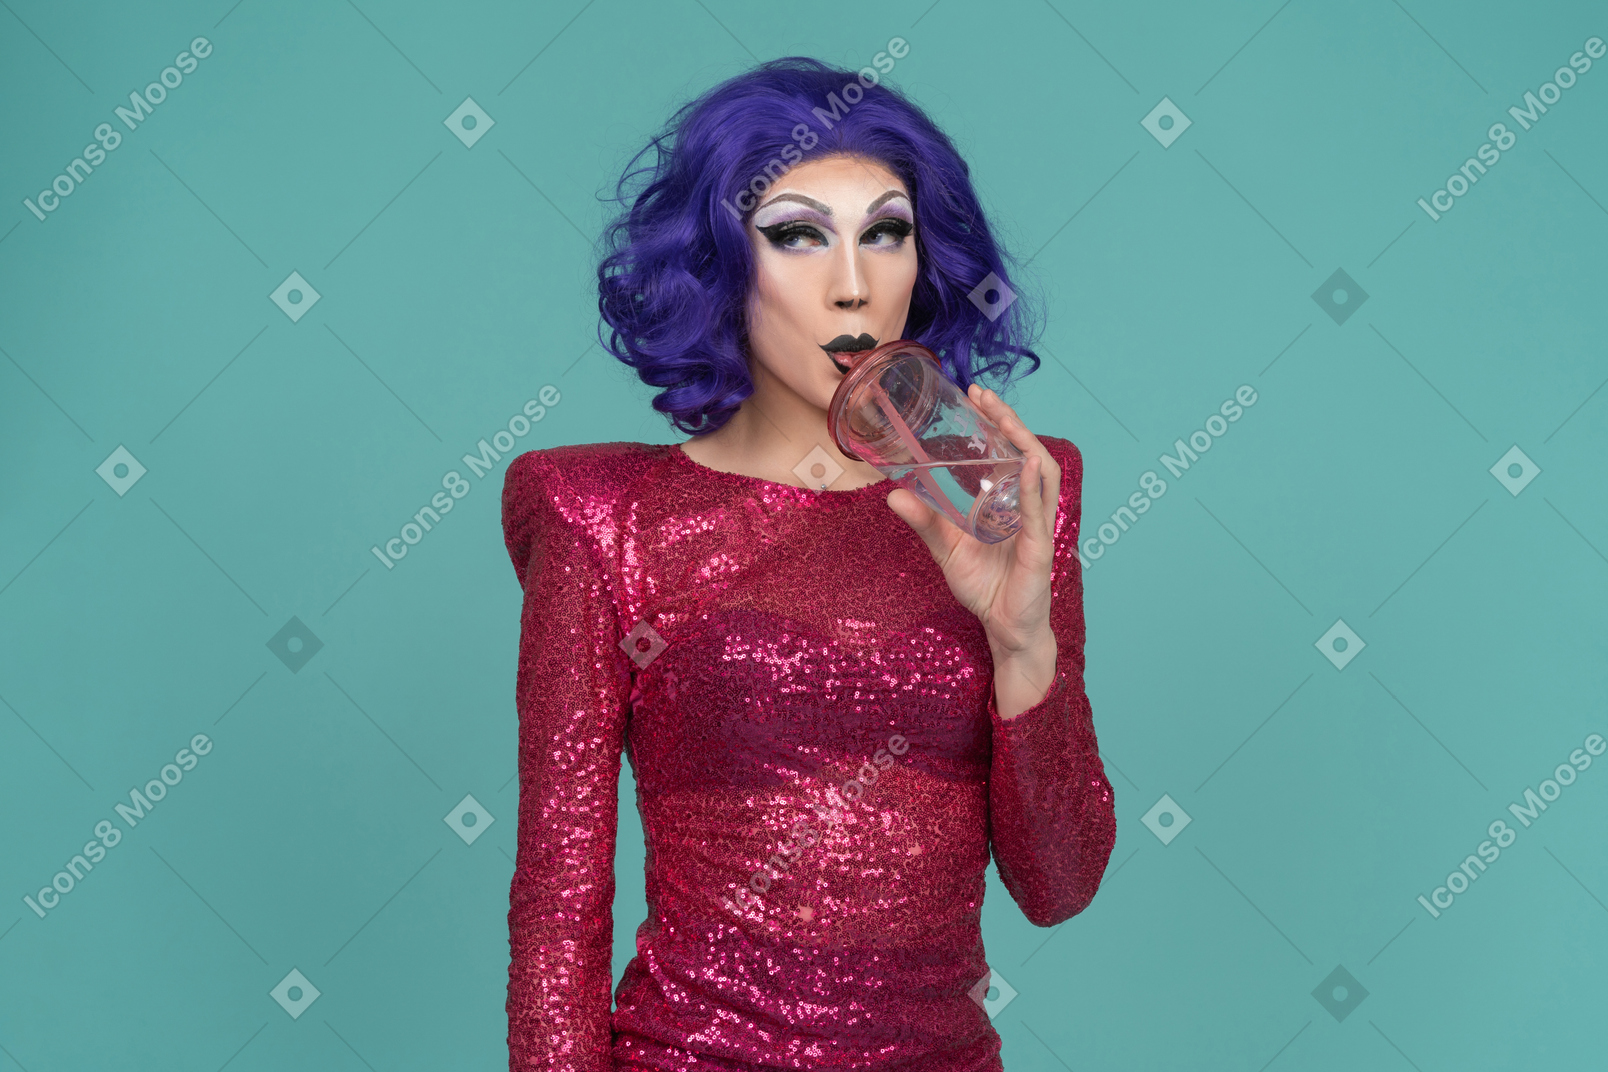 Drag queen in pink sequin dress looking sideways while having a drink